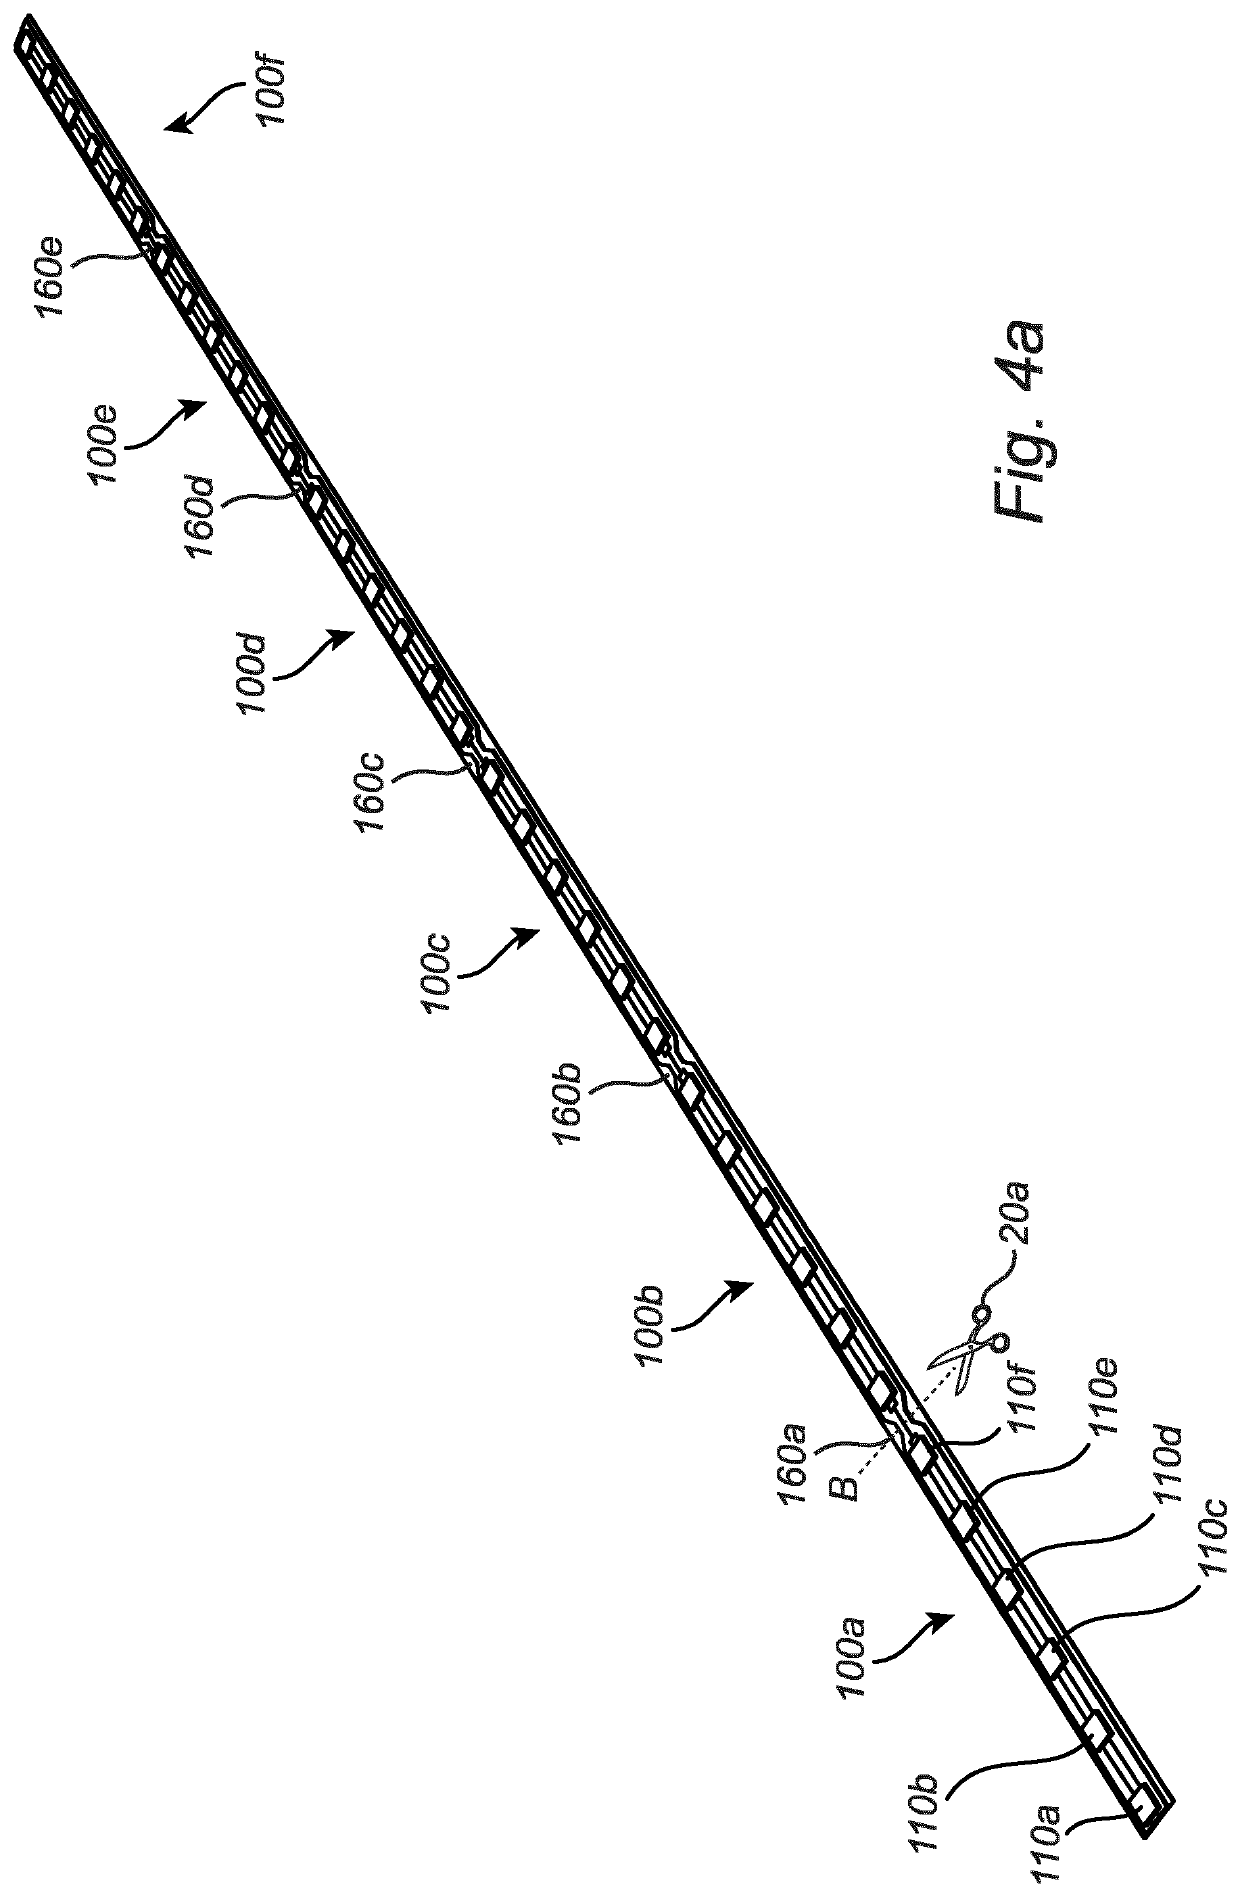 Electronic arrangement and method of manufacturing the same